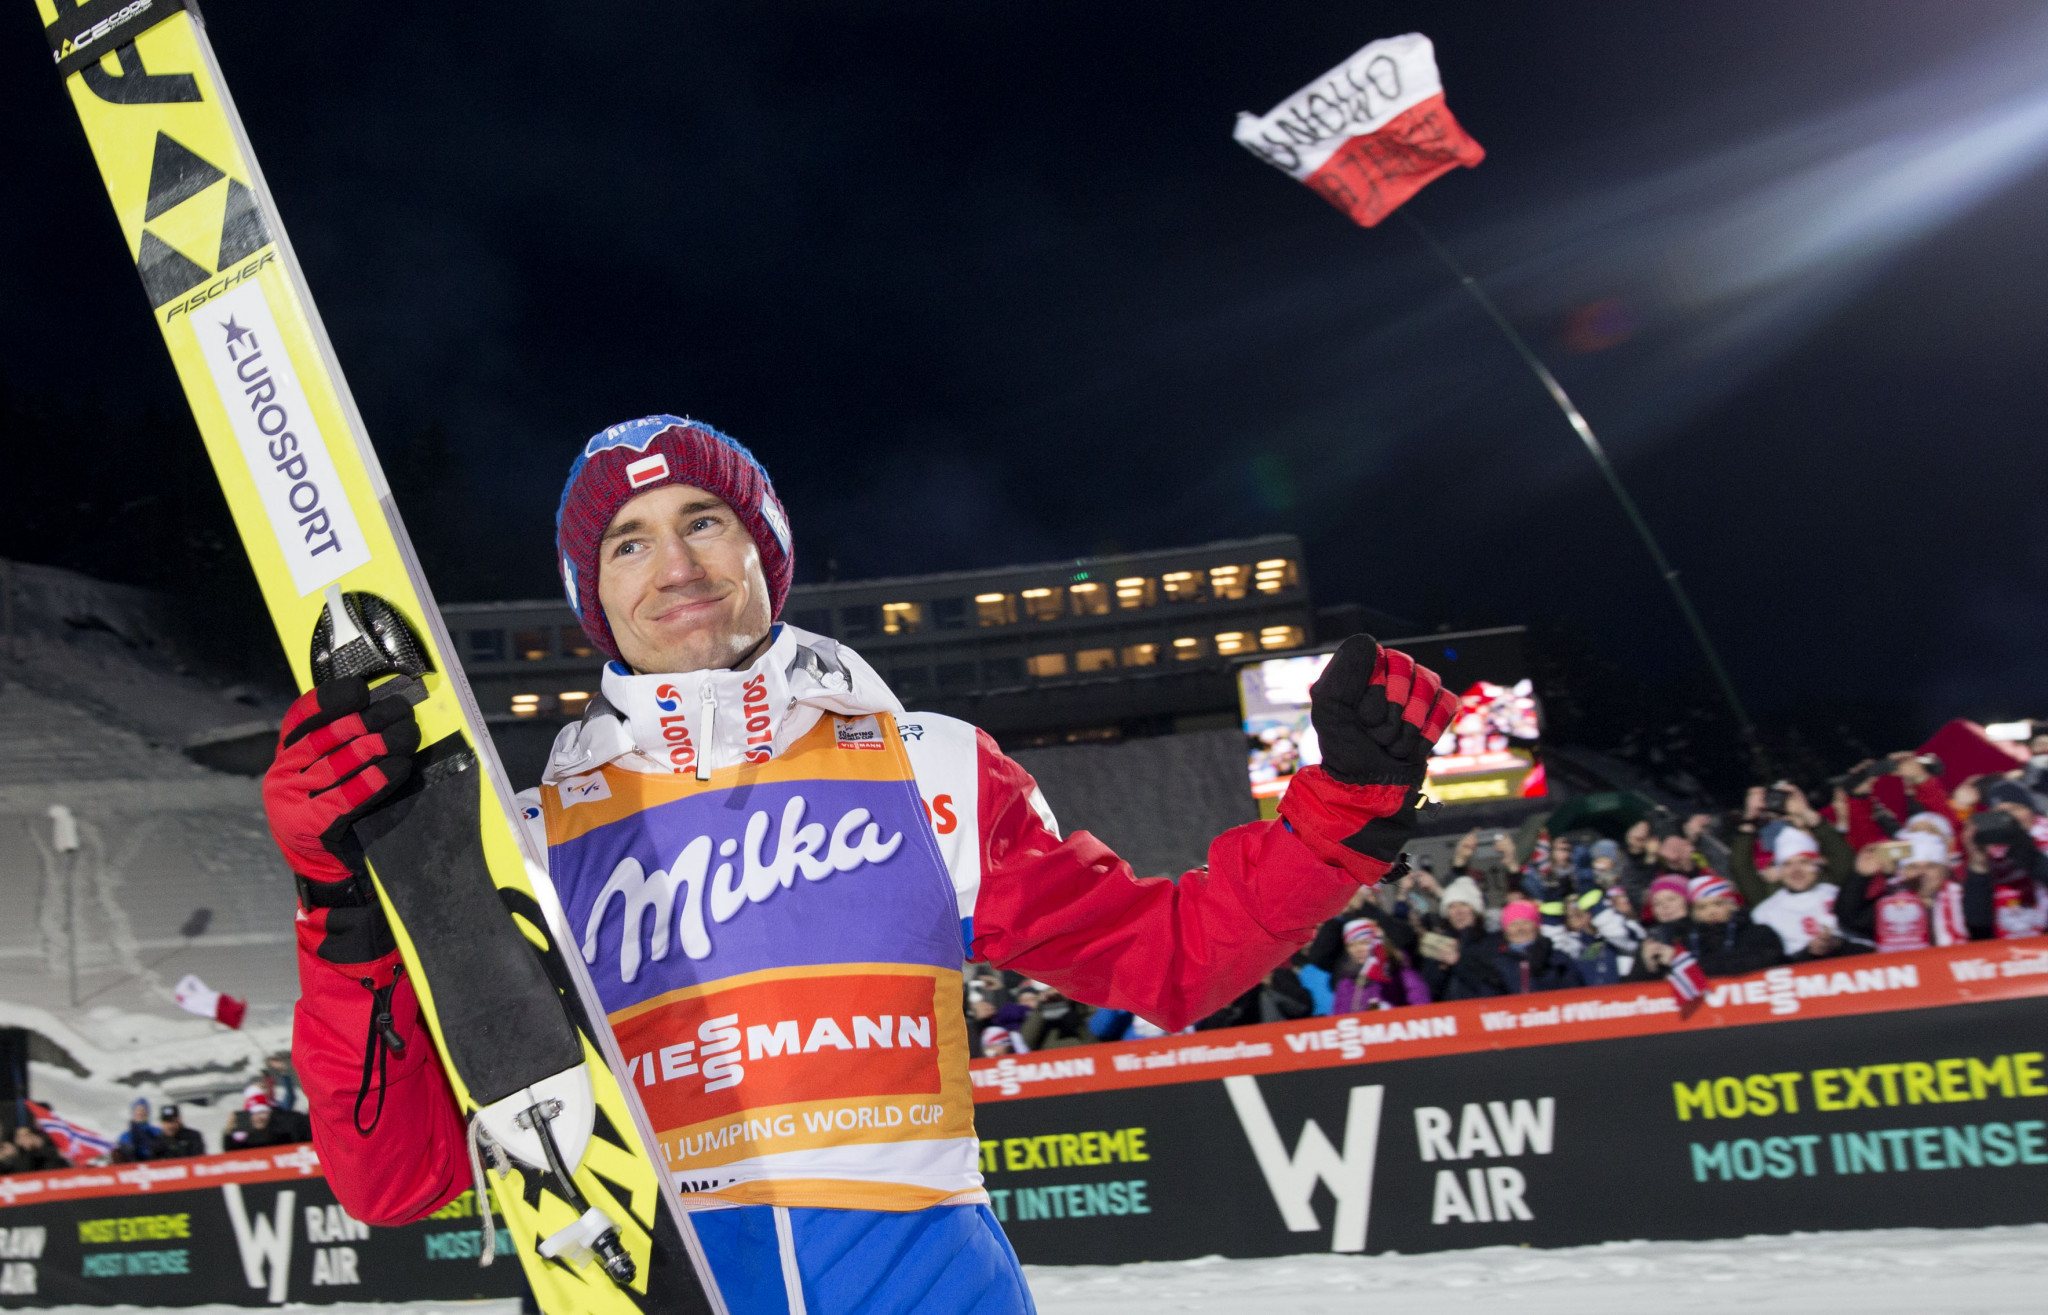 Stoch again sublime at Ski Jumping World Cup in Vikersund